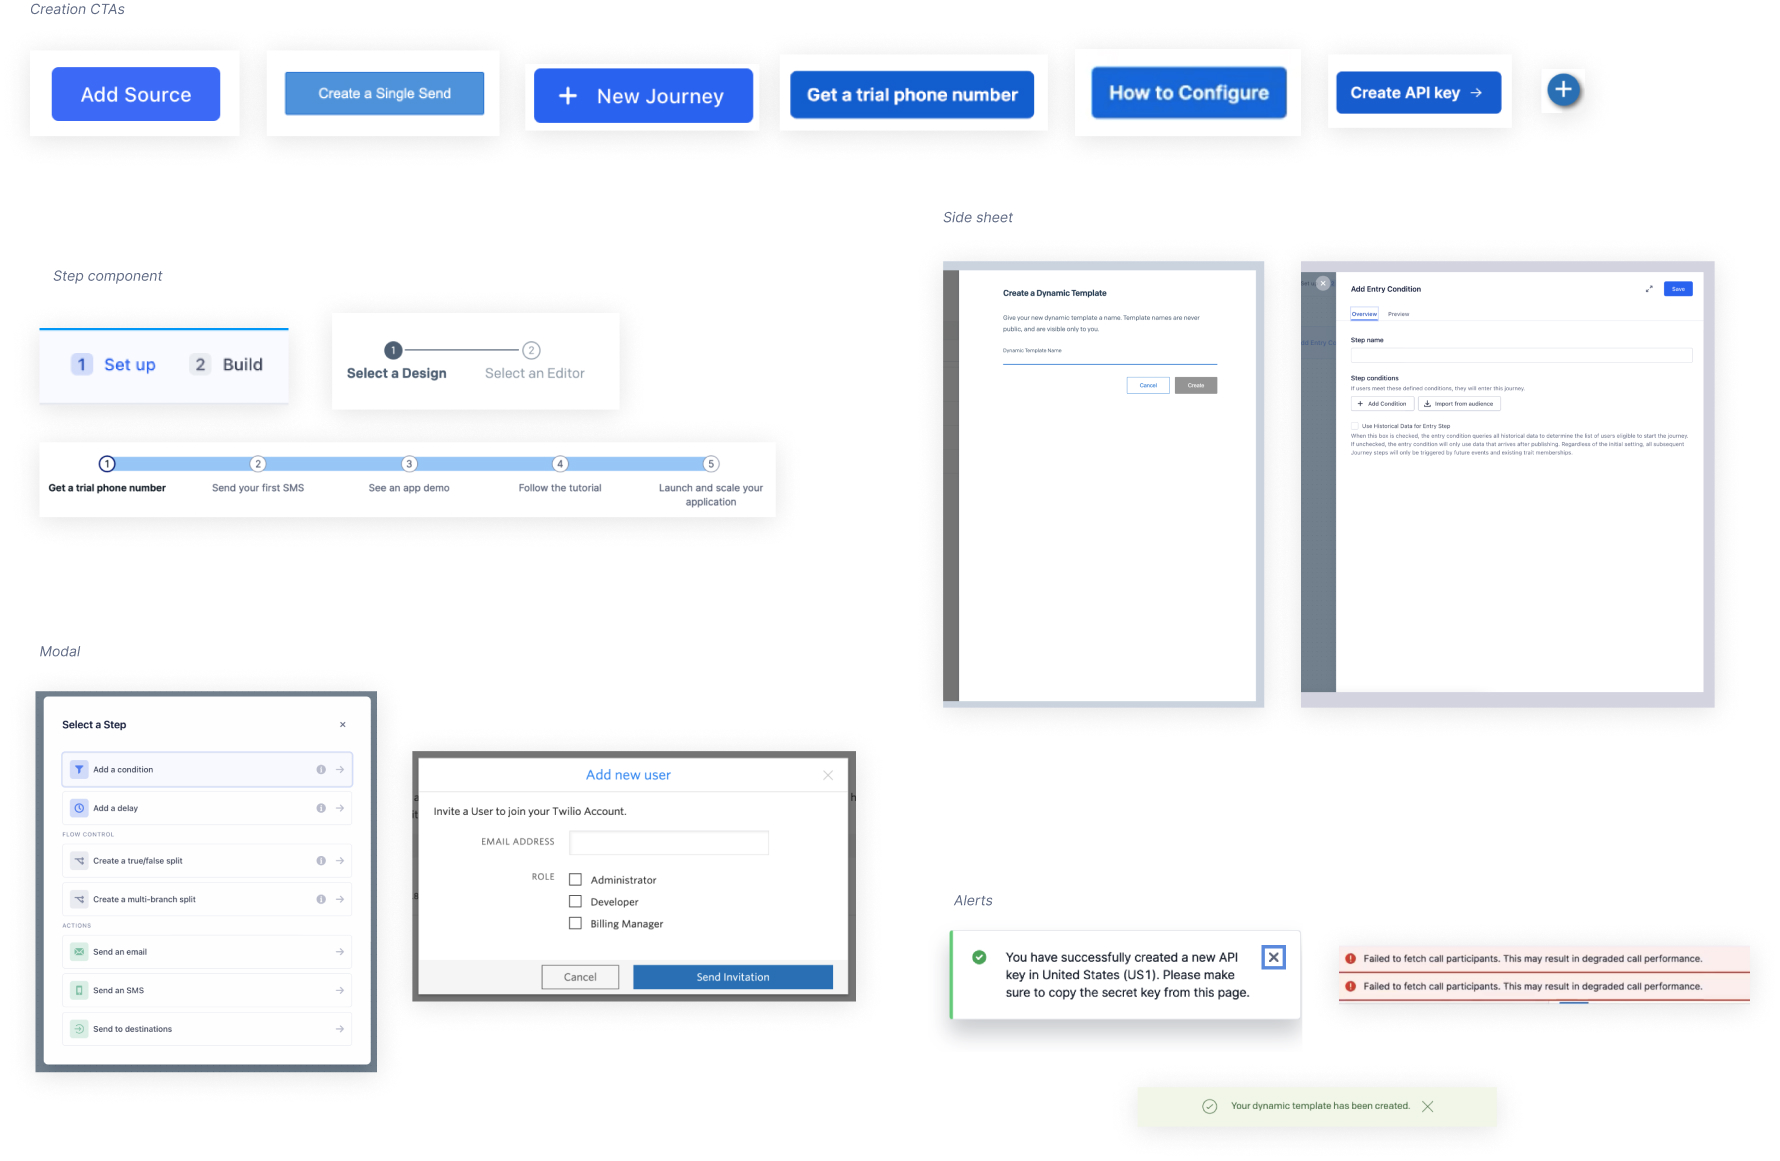 Screenshots of creation flows from across Segment, SendGrid, Console, and Flex, including 7 ever-so-slightly different blue primary buttons. 😂